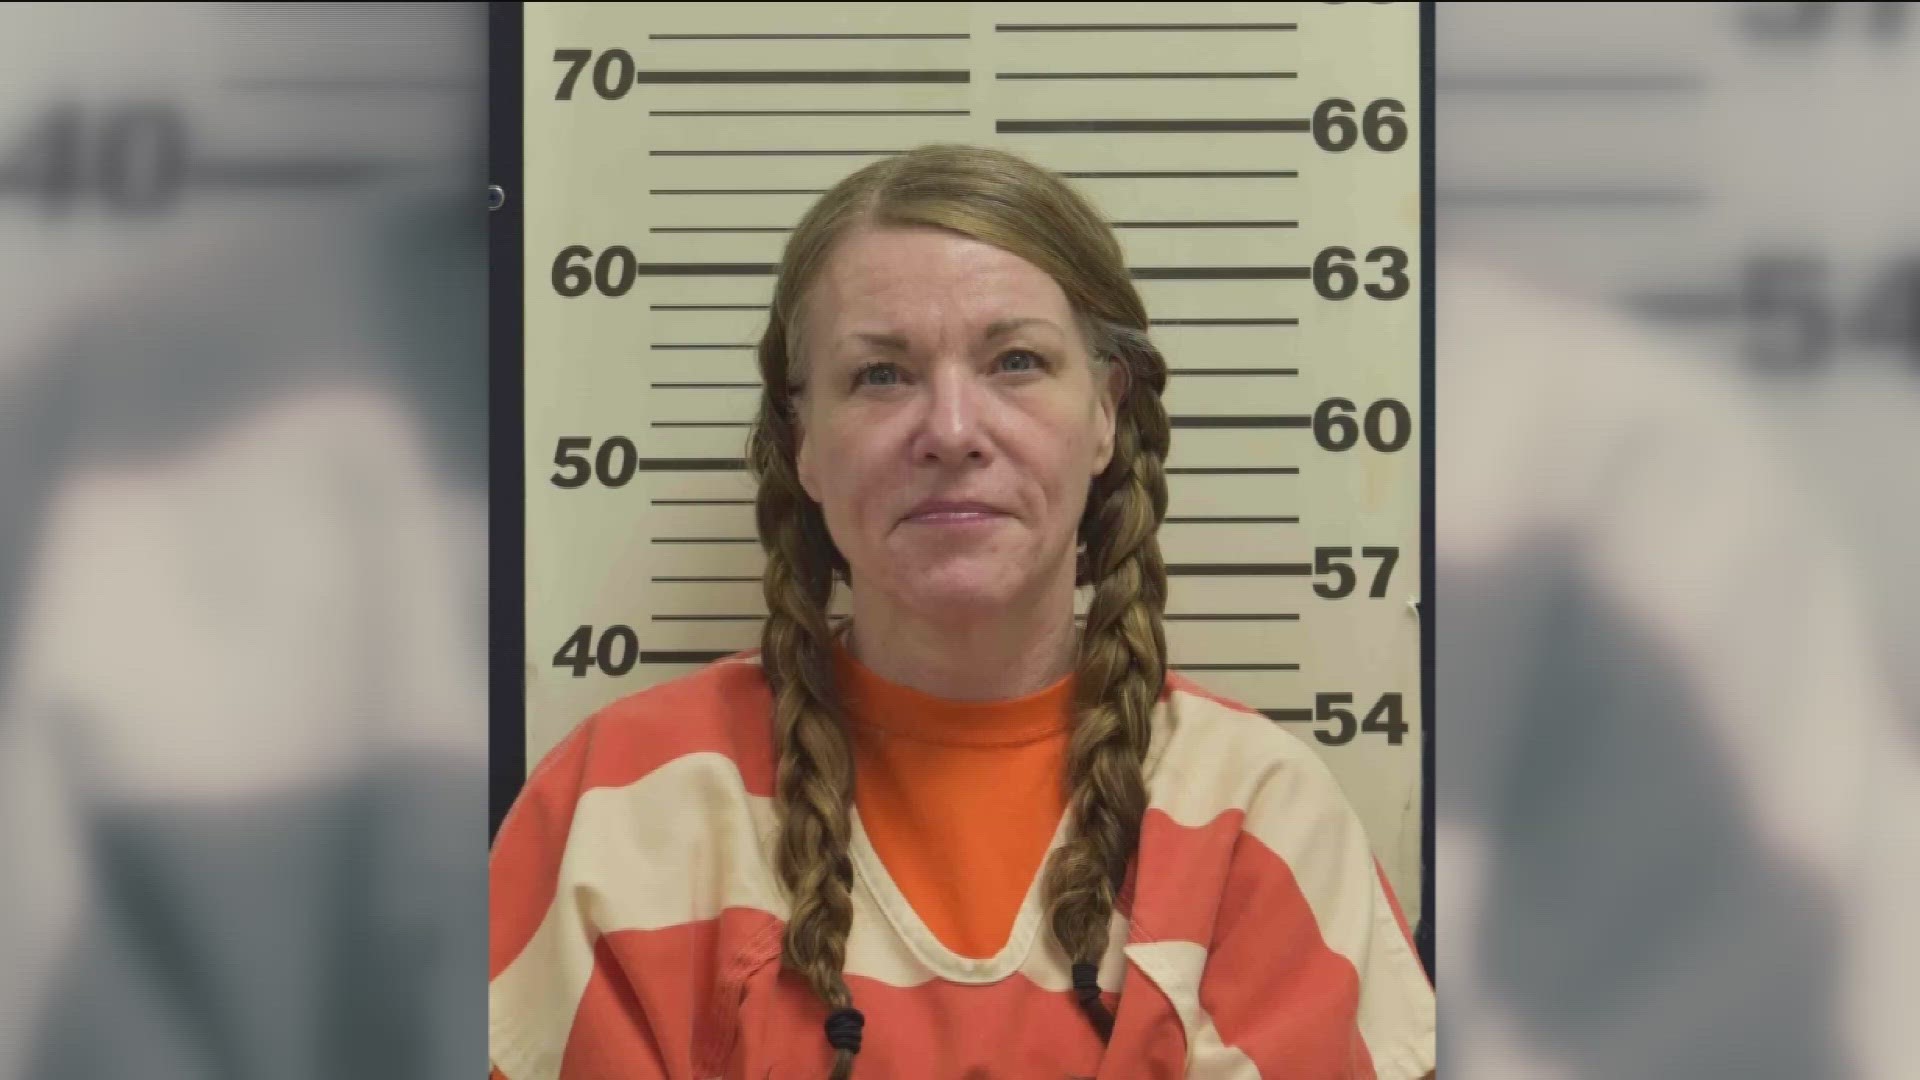 Lori Vallow Daybell, found guilty of murdering her children and conspiring to murder Tammy Daybell, will be sentenced July 31.